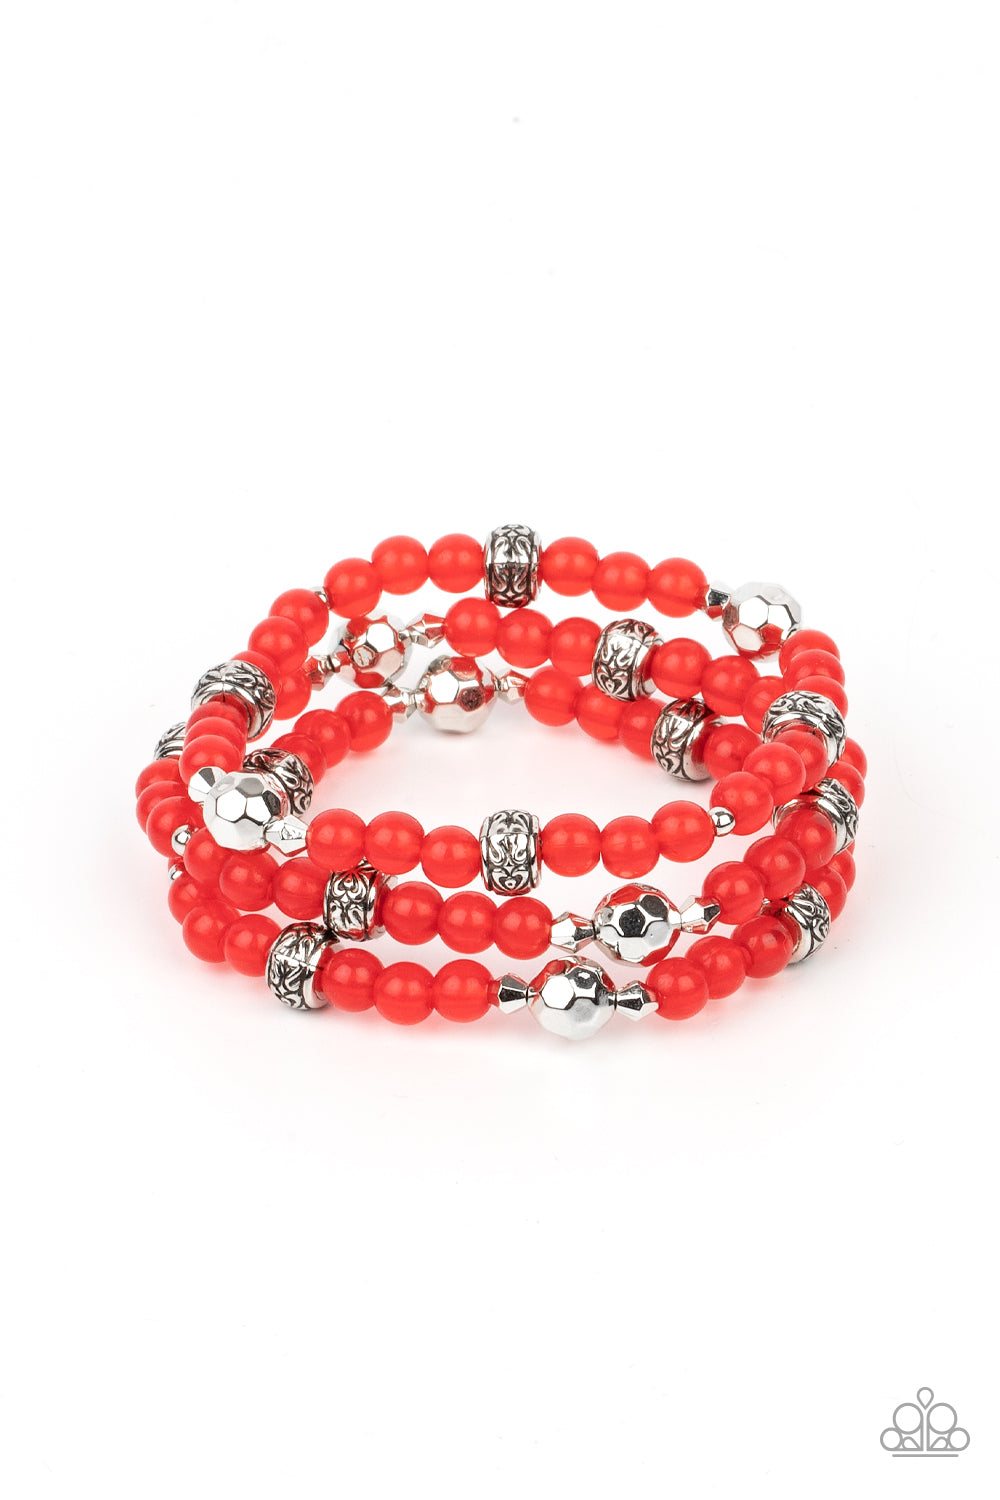 Here to STAYCATION - red - Paparazzi bracelet